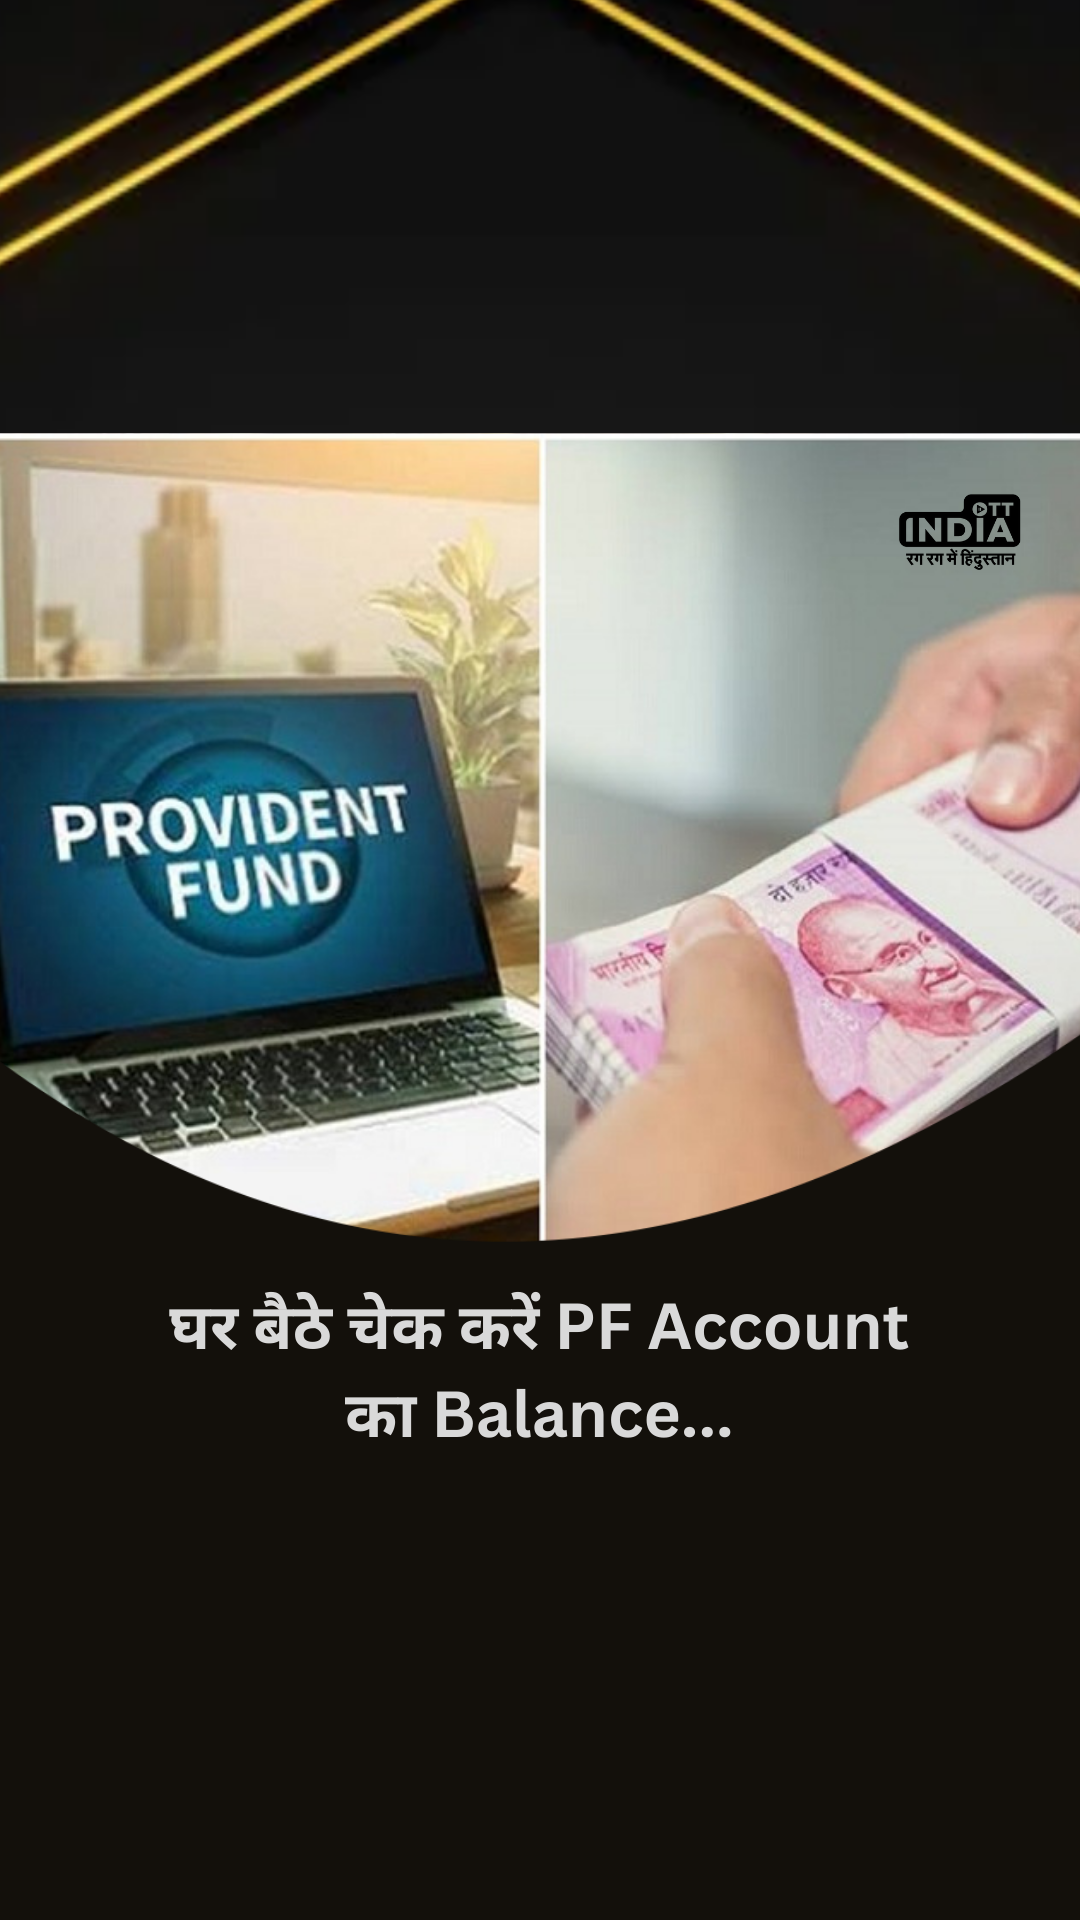 How to check PF Account Balance Online Step By Step